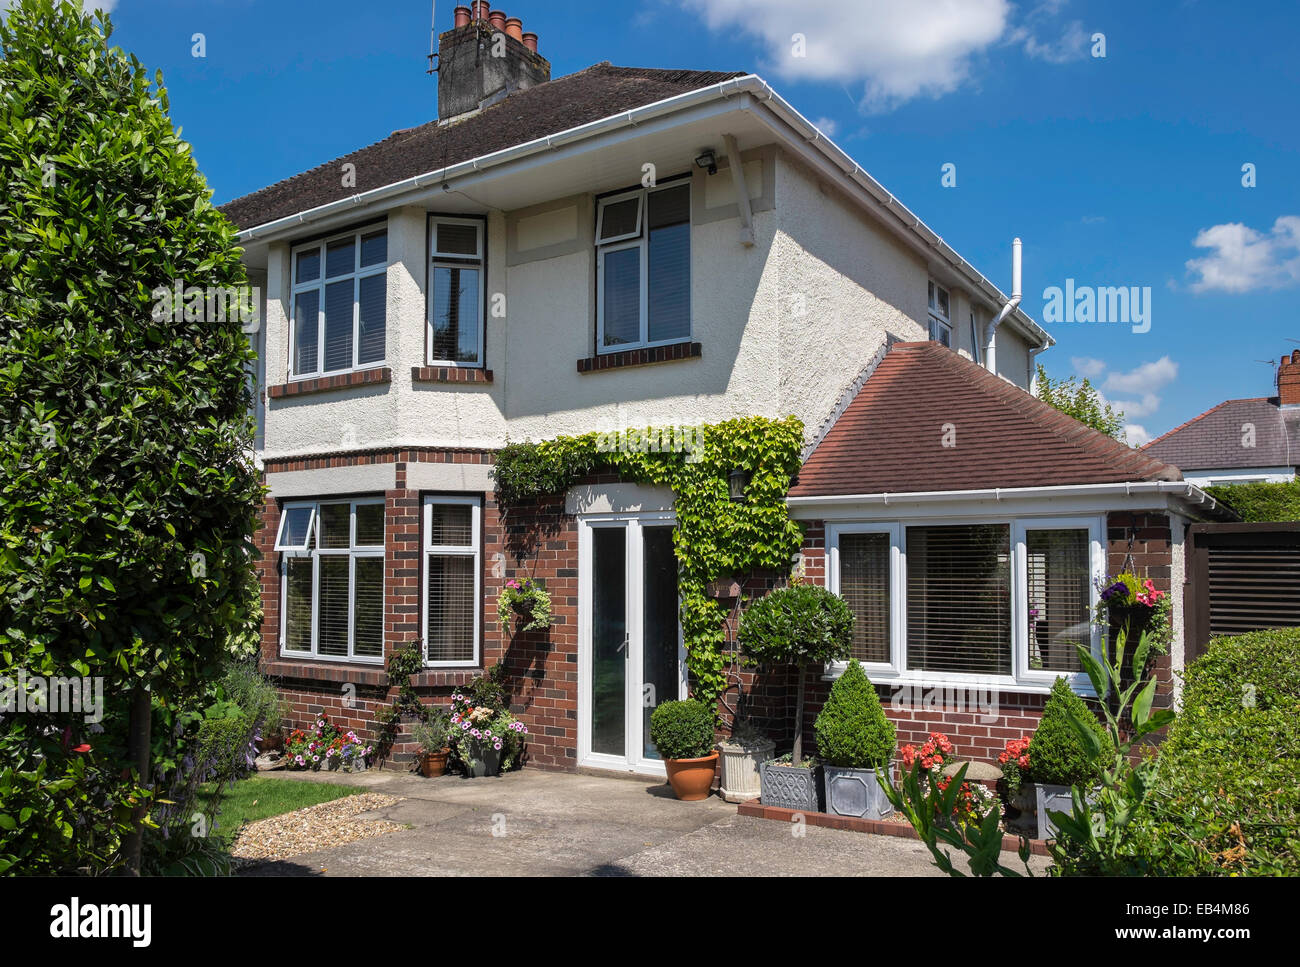 Suburban semi-detached house showing front of house with paved driveway and potted shrubs and plants. Cardiff Wales UK Stock Photo